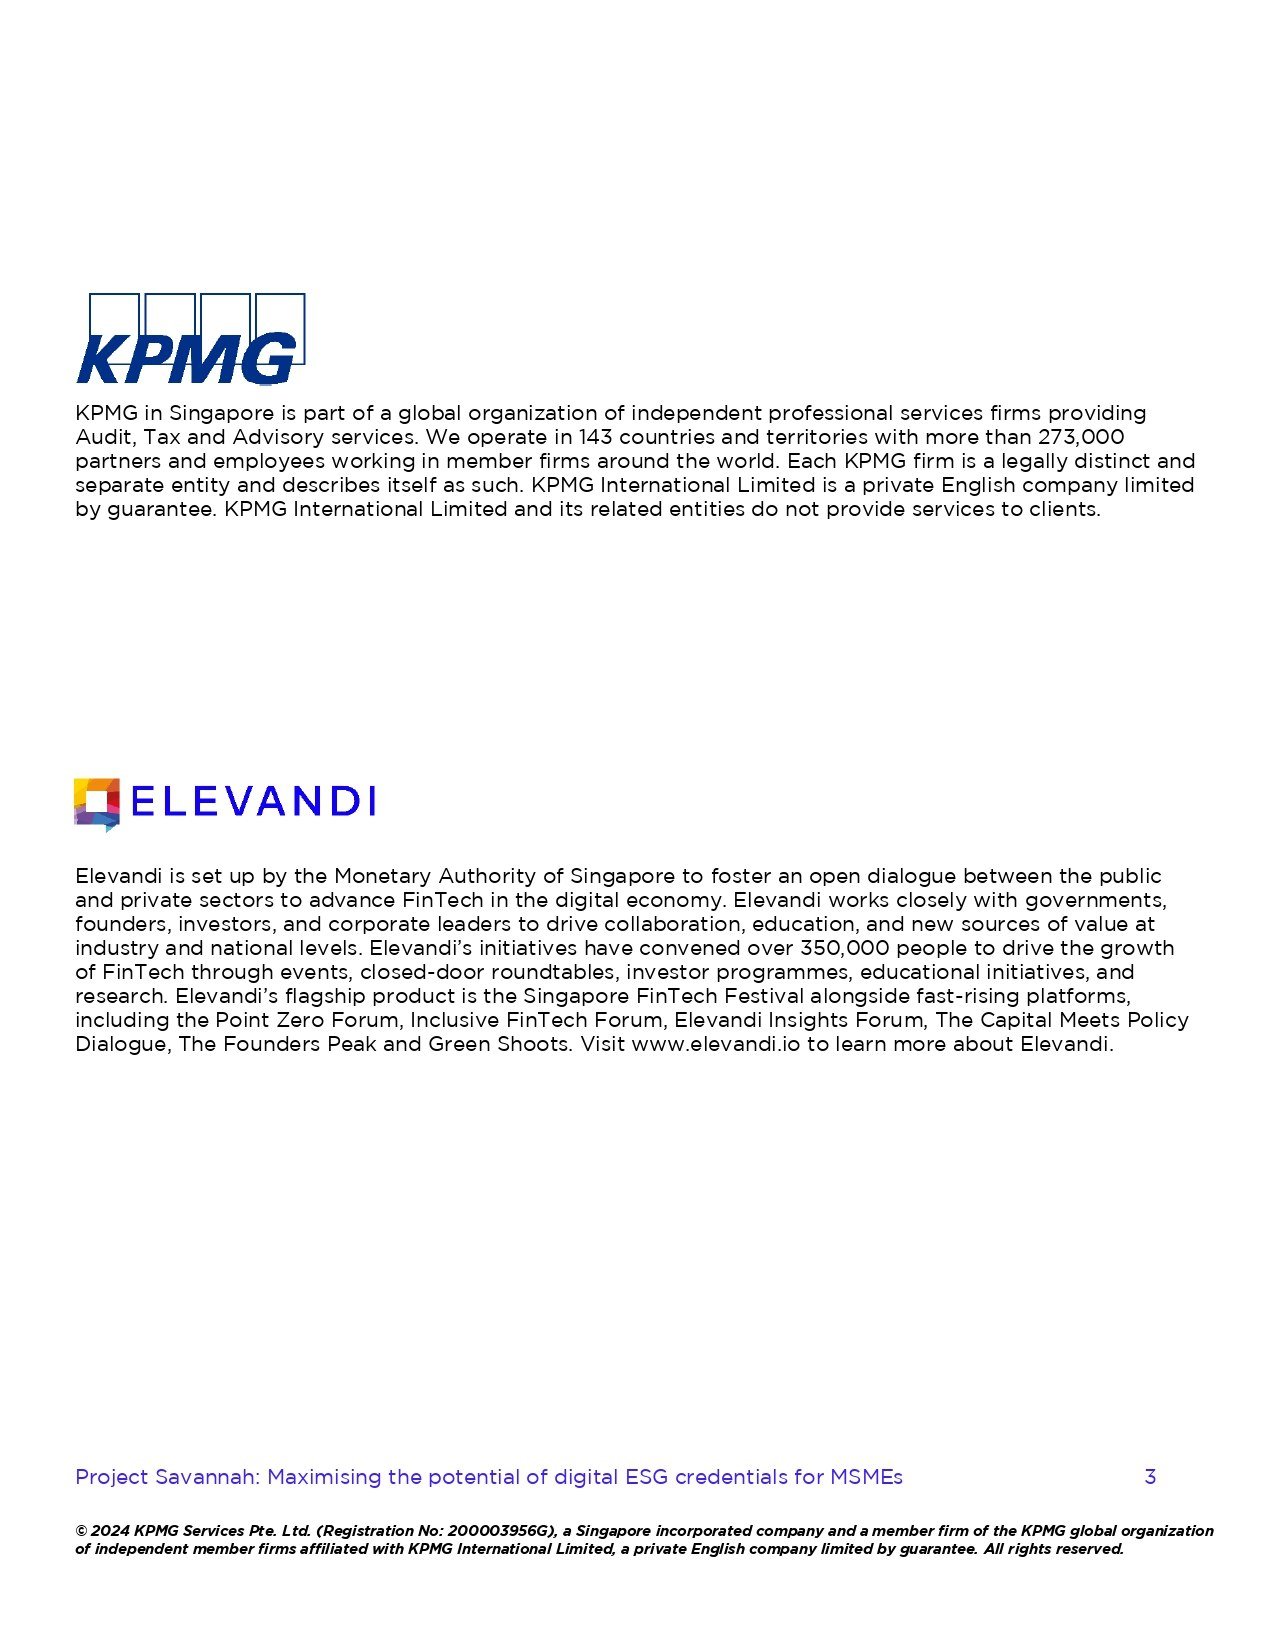 Project-savannah-maximising-the-potential-of-digital-esg-credentials-for-msmes-KPMGxElevandi-3